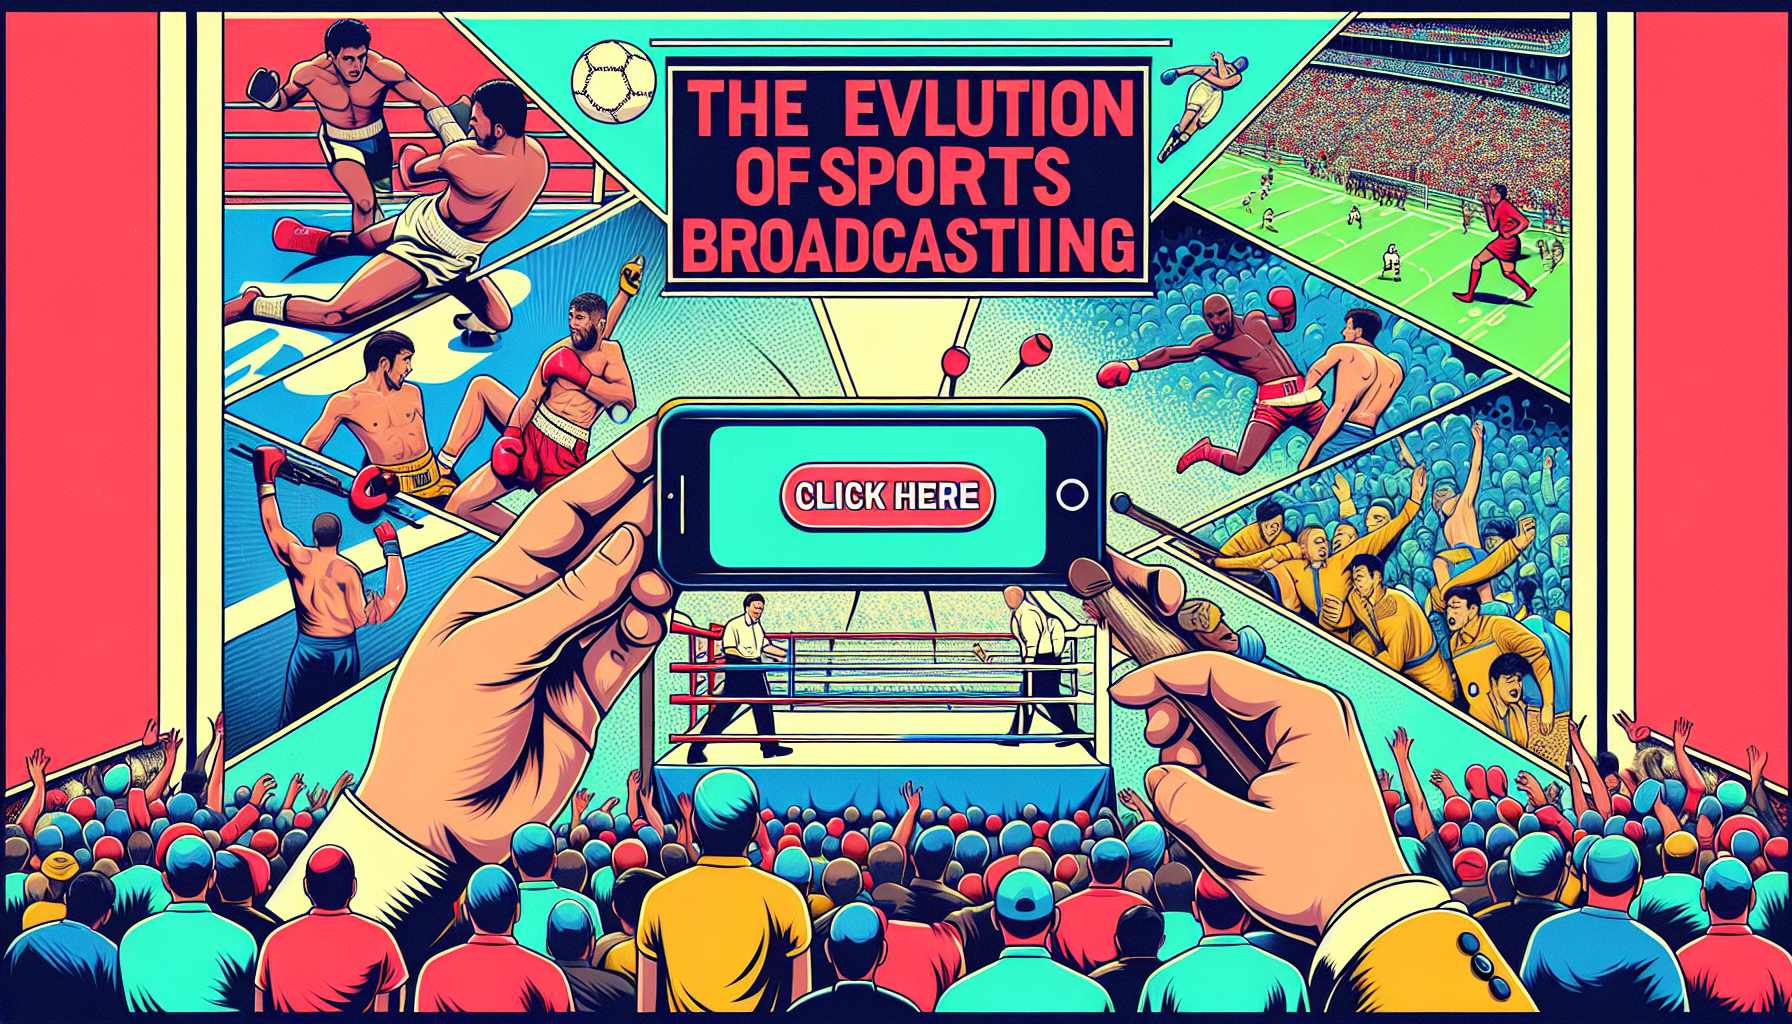 discover the potential impact of the netflix's foray into sports broadcasting with the mike tyson-jake paul fight and nfl games, and how it could reshape the future of streaming success.